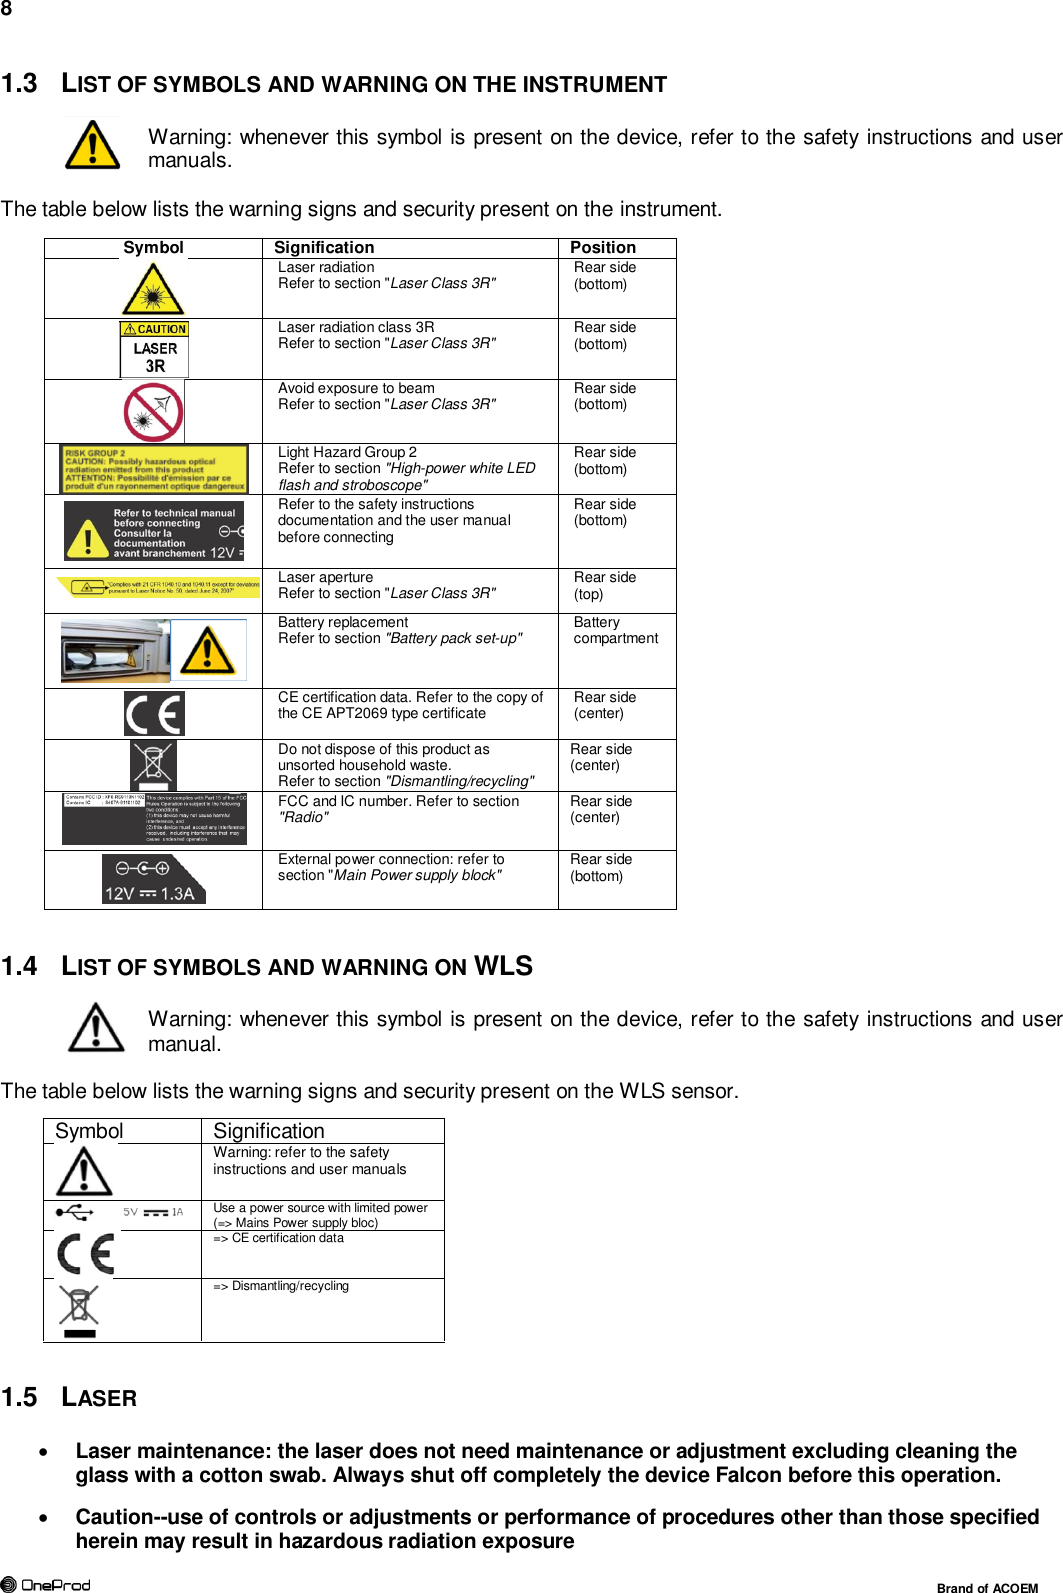 8           Brand of ACOEM 1.3  LIST OF SYMBOLS AND WARNING ON THE INSTRUMENT  Warning: whenever this symbol is present on the device, refer to the safety instructions and user manuals.  The table below lists the warning signs and security present on the instrument.  Symbol Signification Position  Laser radiation Refer to section &quot;Laser Class 3R&quot; Rear side (bottom)  Laser radiation class 3R Refer to section &quot;Laser Class 3R&quot; Rear side (bottom)  Avoid exposure to beam  Refer to section &quot;Laser Class 3R&quot; Rear side (bottom)  Light Hazard Group 2 Refer to section &quot;High-power white LED flash and stroboscope&quot; Rear side (bottom)  Refer to the safety instructions documentation and the user manual before connecting Rear side (bottom)  Laser aperture Refer to section &quot;Laser Class 3R&quot; Rear side (top)  Battery replacement Refer to section &quot;Battery pack set-up&quot;  Battery compartment   CE certification data. Refer to the copy of the CE APT2069 type certificate Rear side (center)  Do not dispose of this product as unsorted household waste. Refer to section &quot;Dismantling/recycling&quot; Rear side (center)  FCC and IC number. Refer to section &quot;Radio&quot; Rear side (center)  External power connection: refer to section &quot;Main Power supply block&quot; Rear side (bottom)  1.4  LIST OF SYMBOLS AND WARNING ON WLS Warning: whenever this symbol is present on the device, refer to the safety instructions and user manual.  The table below lists the warning signs and security present on the WLS sensor.  Symbol Signification  Warning: refer to the safety instructions and user manuals  Use a power source with limited power (=&gt; Mains Power supply bloc)  =&gt; CE certification data  =&gt; Dismantling/recycling  1.5  LASER  Laser maintenance: the laser does not need maintenance or adjustment excluding cleaning the glass with a cotton swab. Always shut off completely the device Falcon before this operation.   Caution--use of controls or adjustments or performance of procedures other than those specified herein may result in hazardous radiation exposure   